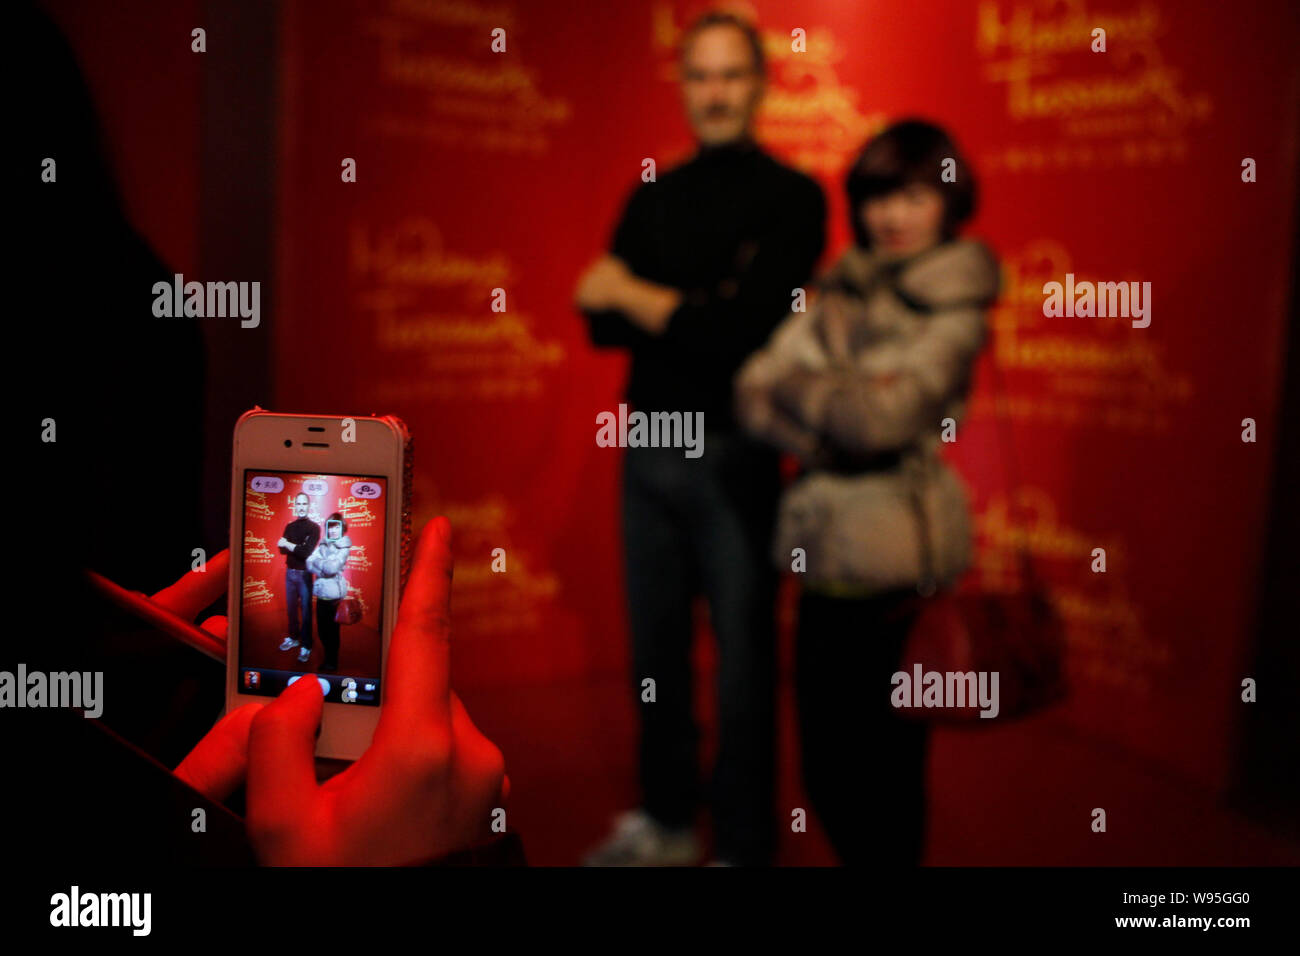 A visitor uses an iPhone 4S smartphone to take photos of another posing with the wax figure of Steve Jobs at Madame Tussauds in Shanghai, China, 24 De Stock Photo